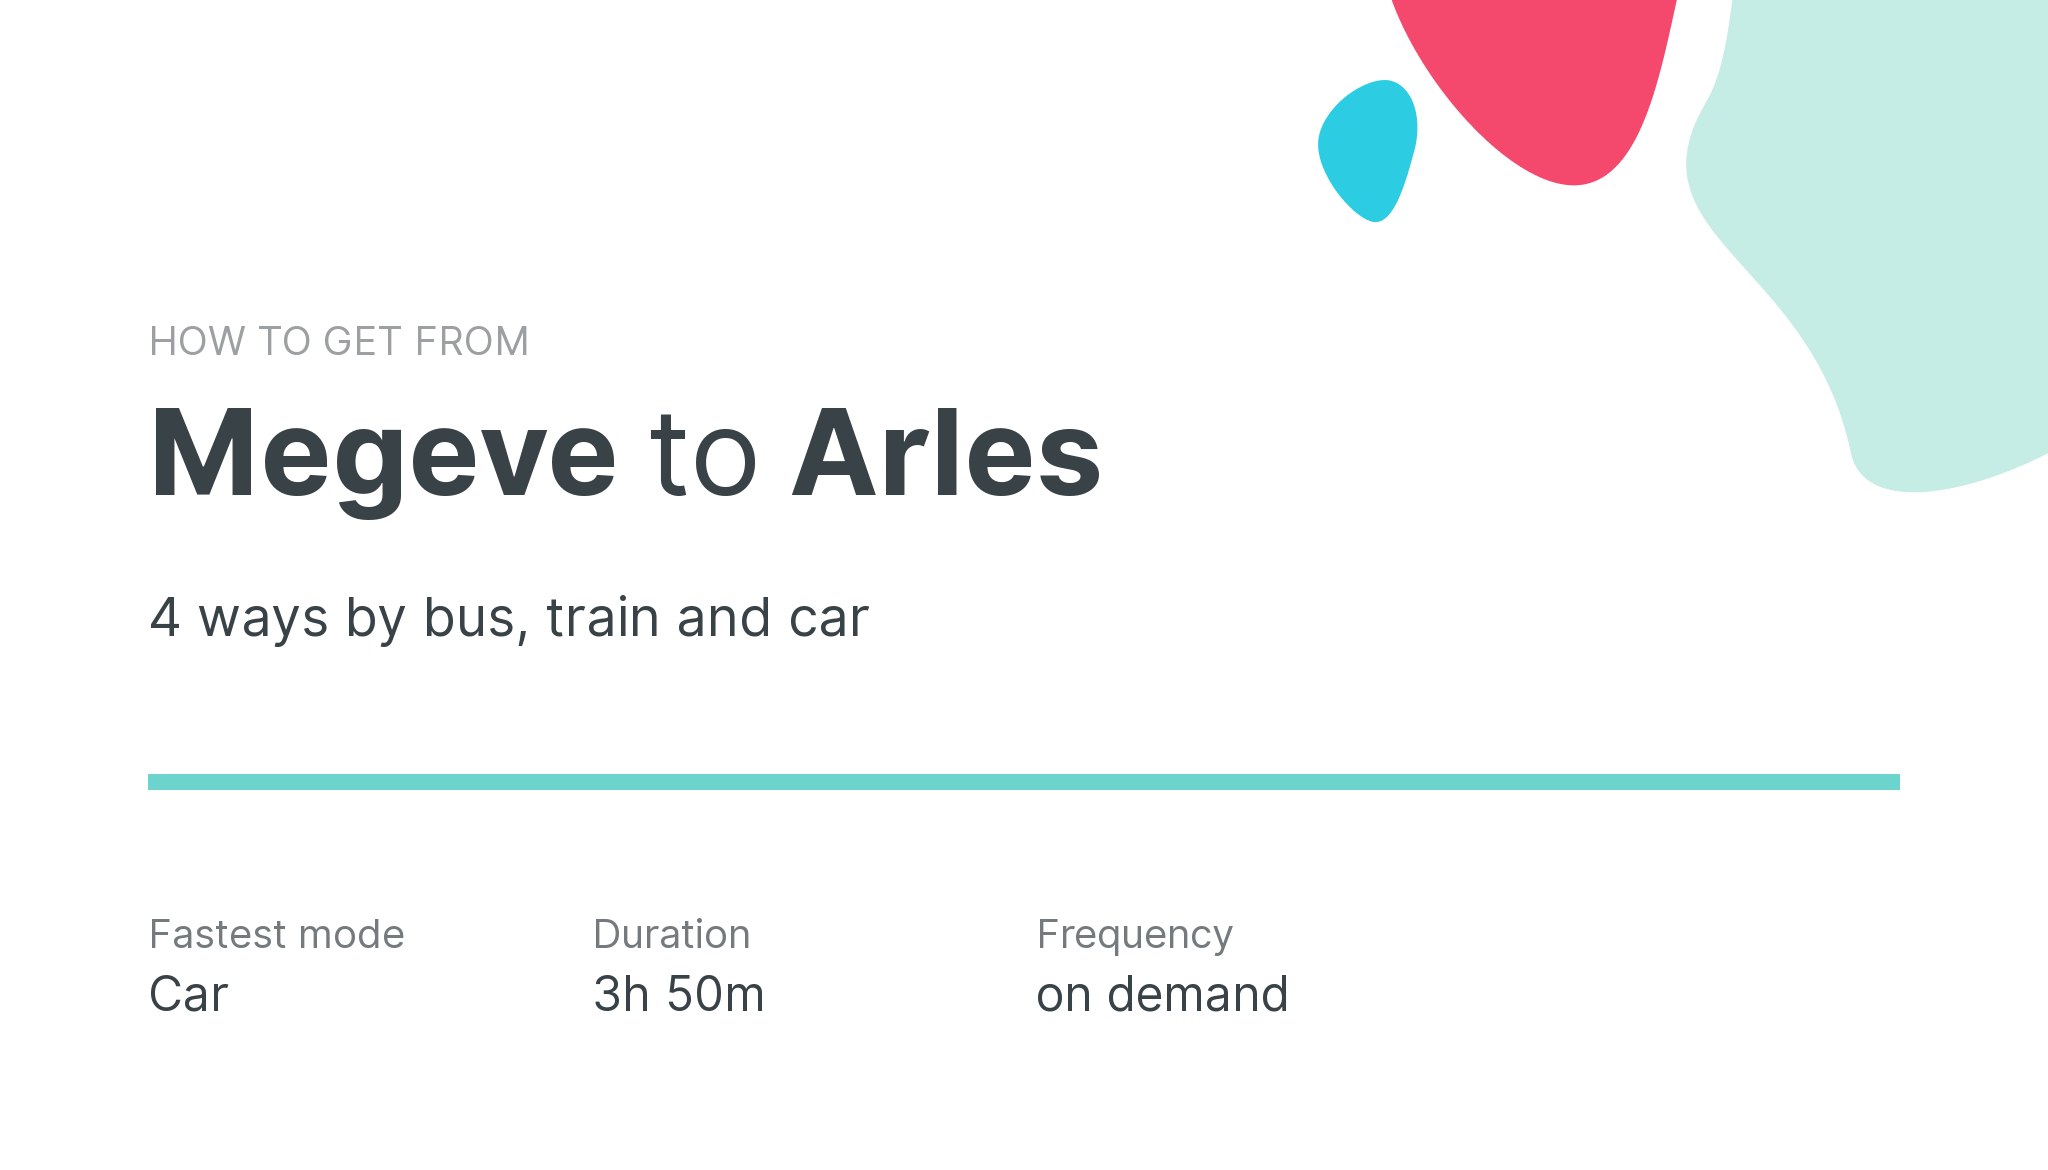 How do I get from Megeve to Arles